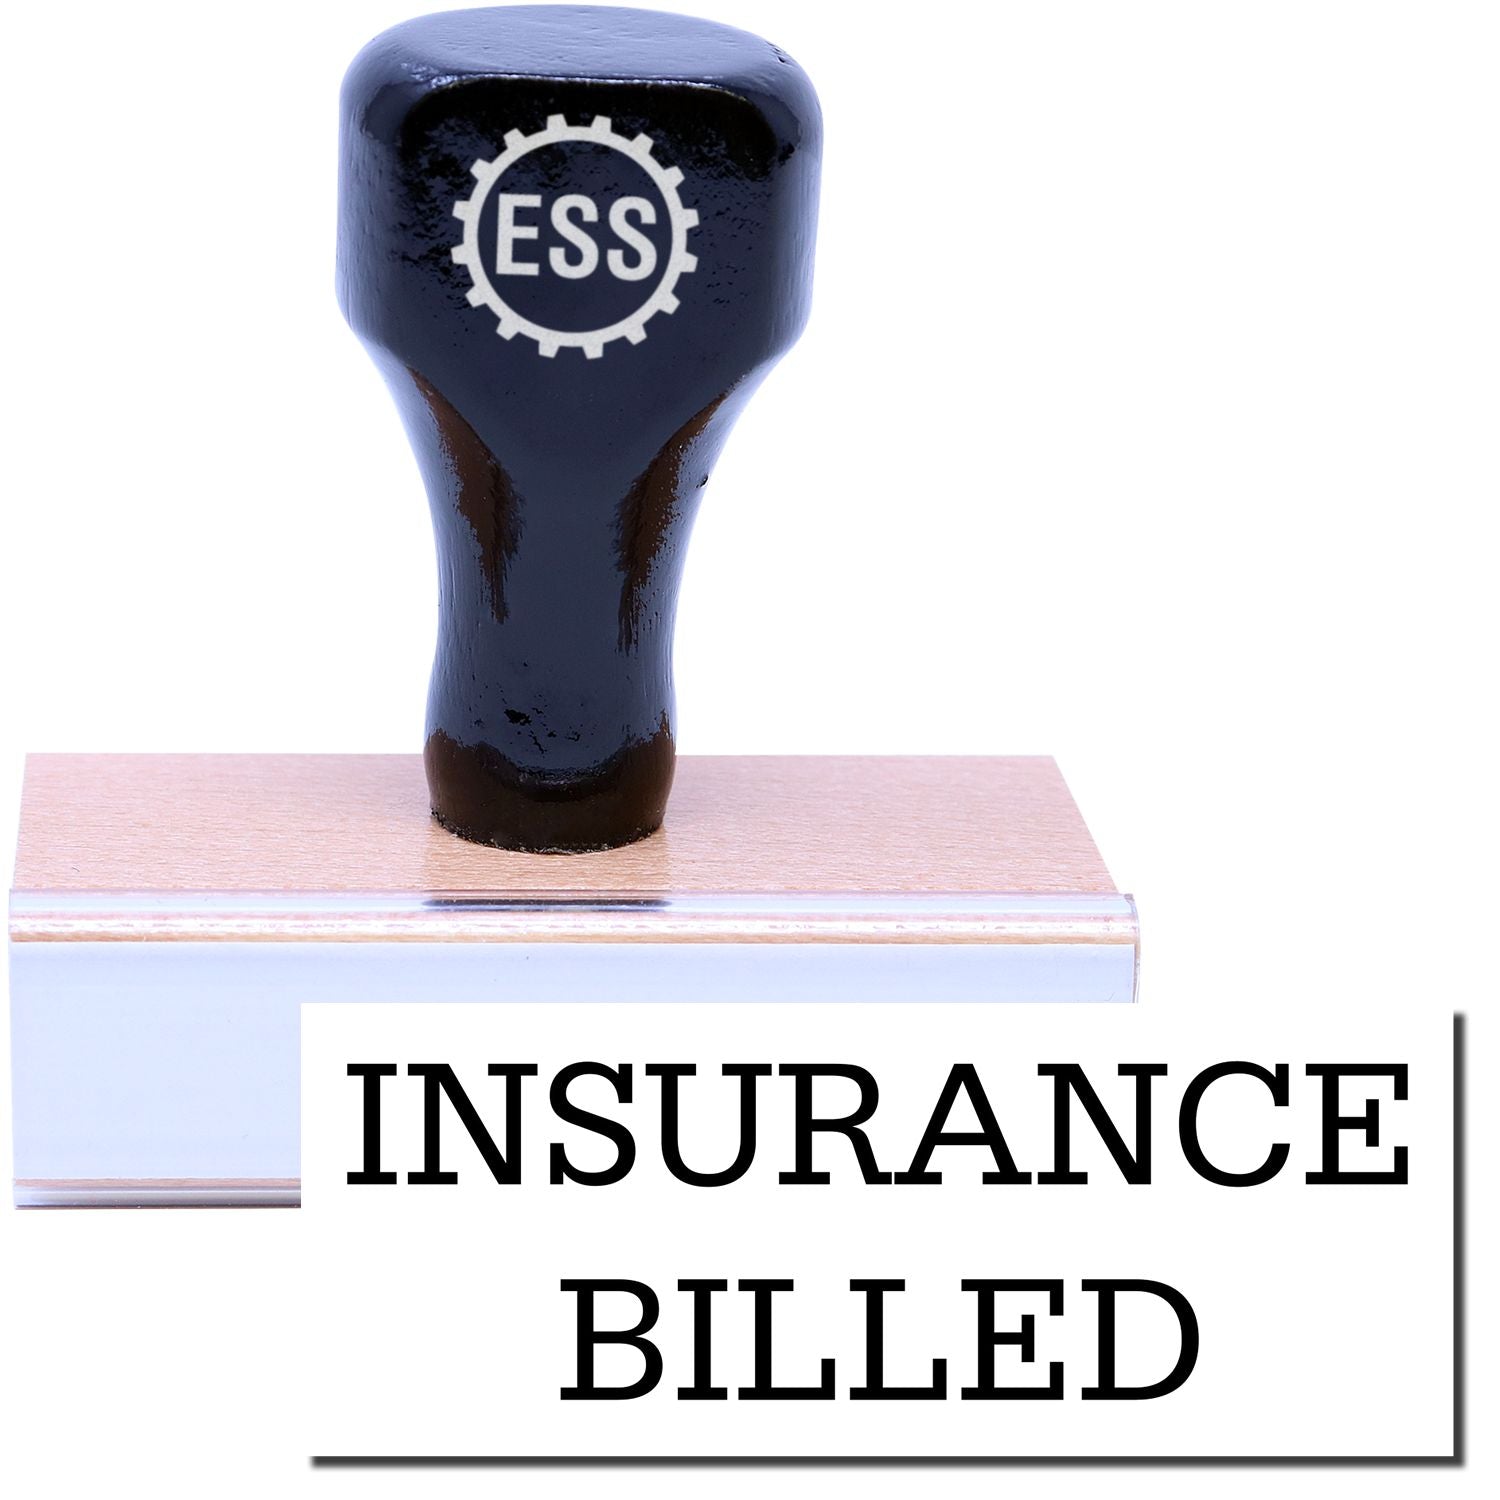 A stock office rubber stamp with a stamped image showing how the text "INSURANCE BILLED" in a large font is displayed after stamping.